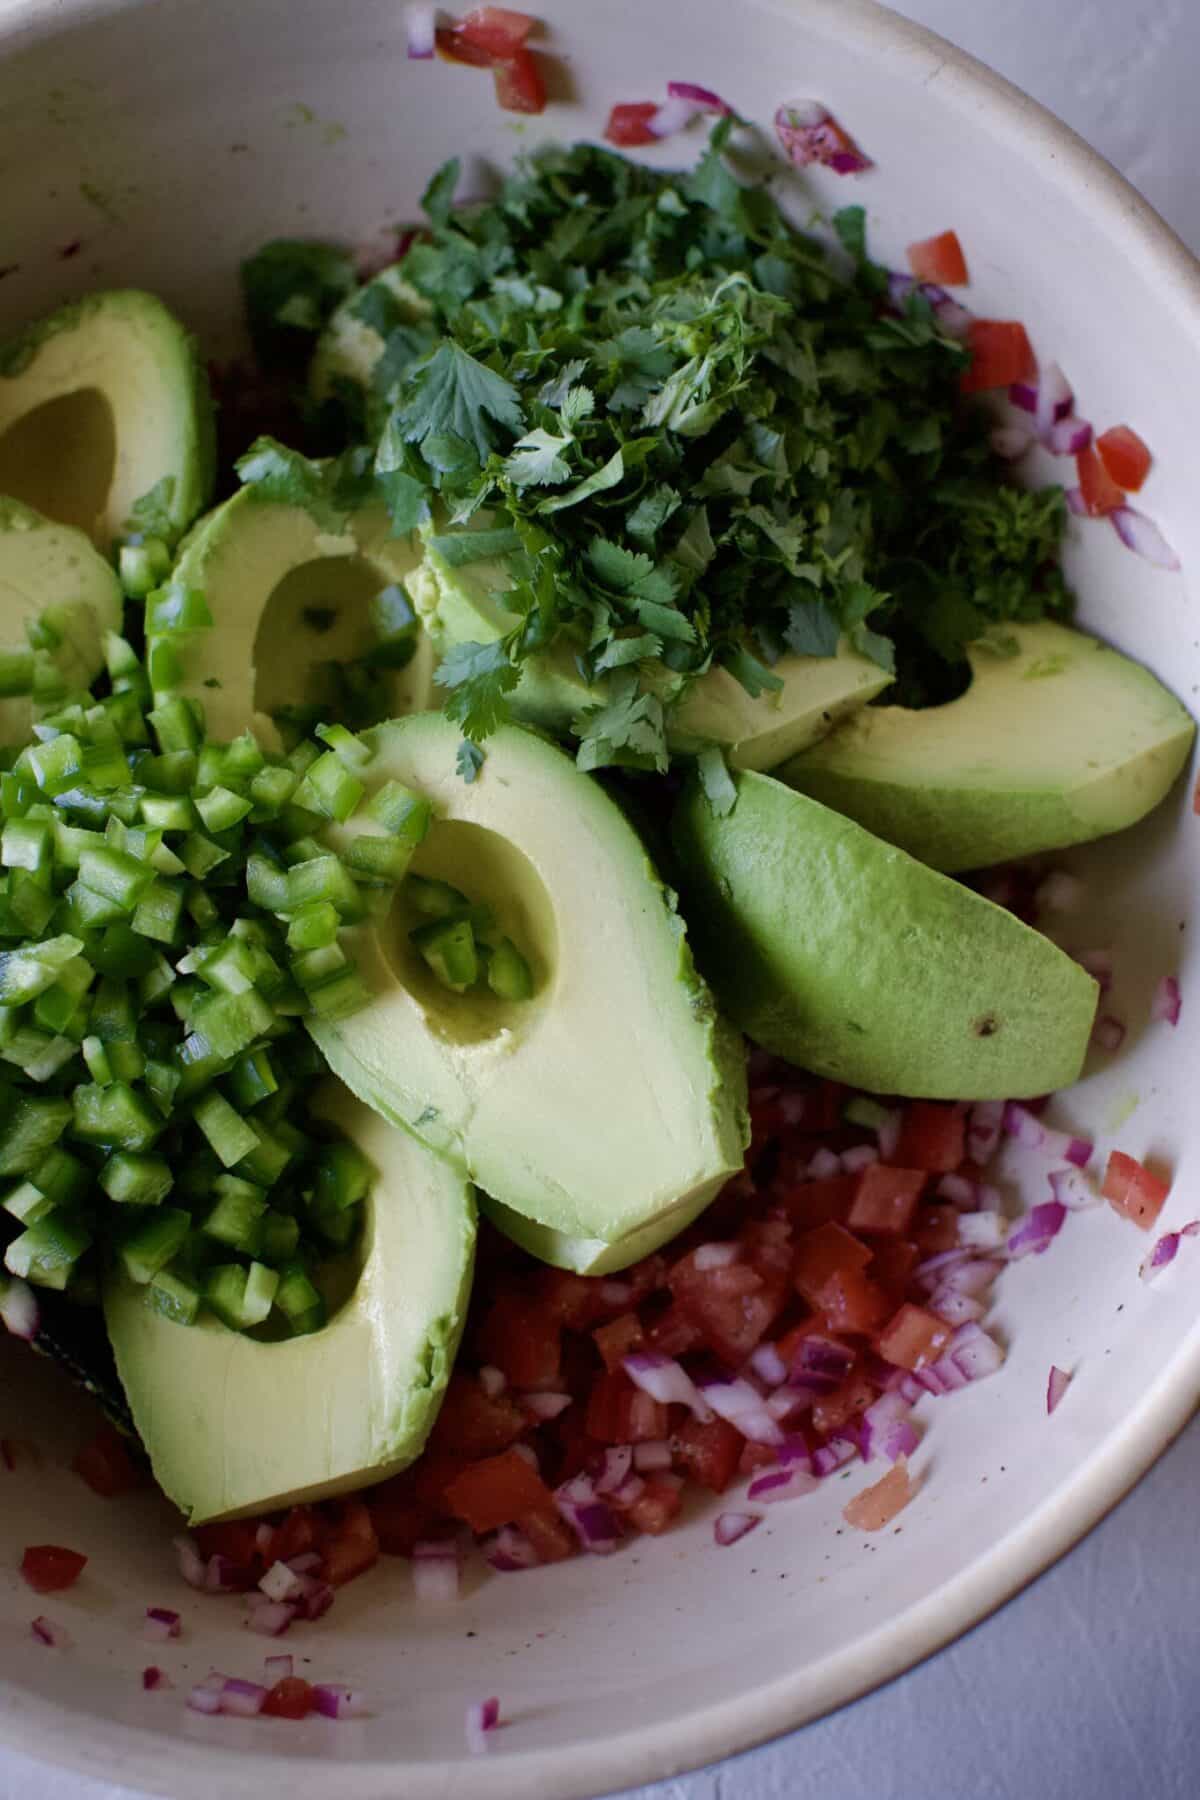 Avocado, jalapeno, and cilantro added to the bowl that has the onion, tomatoes, and lime juice already in it.